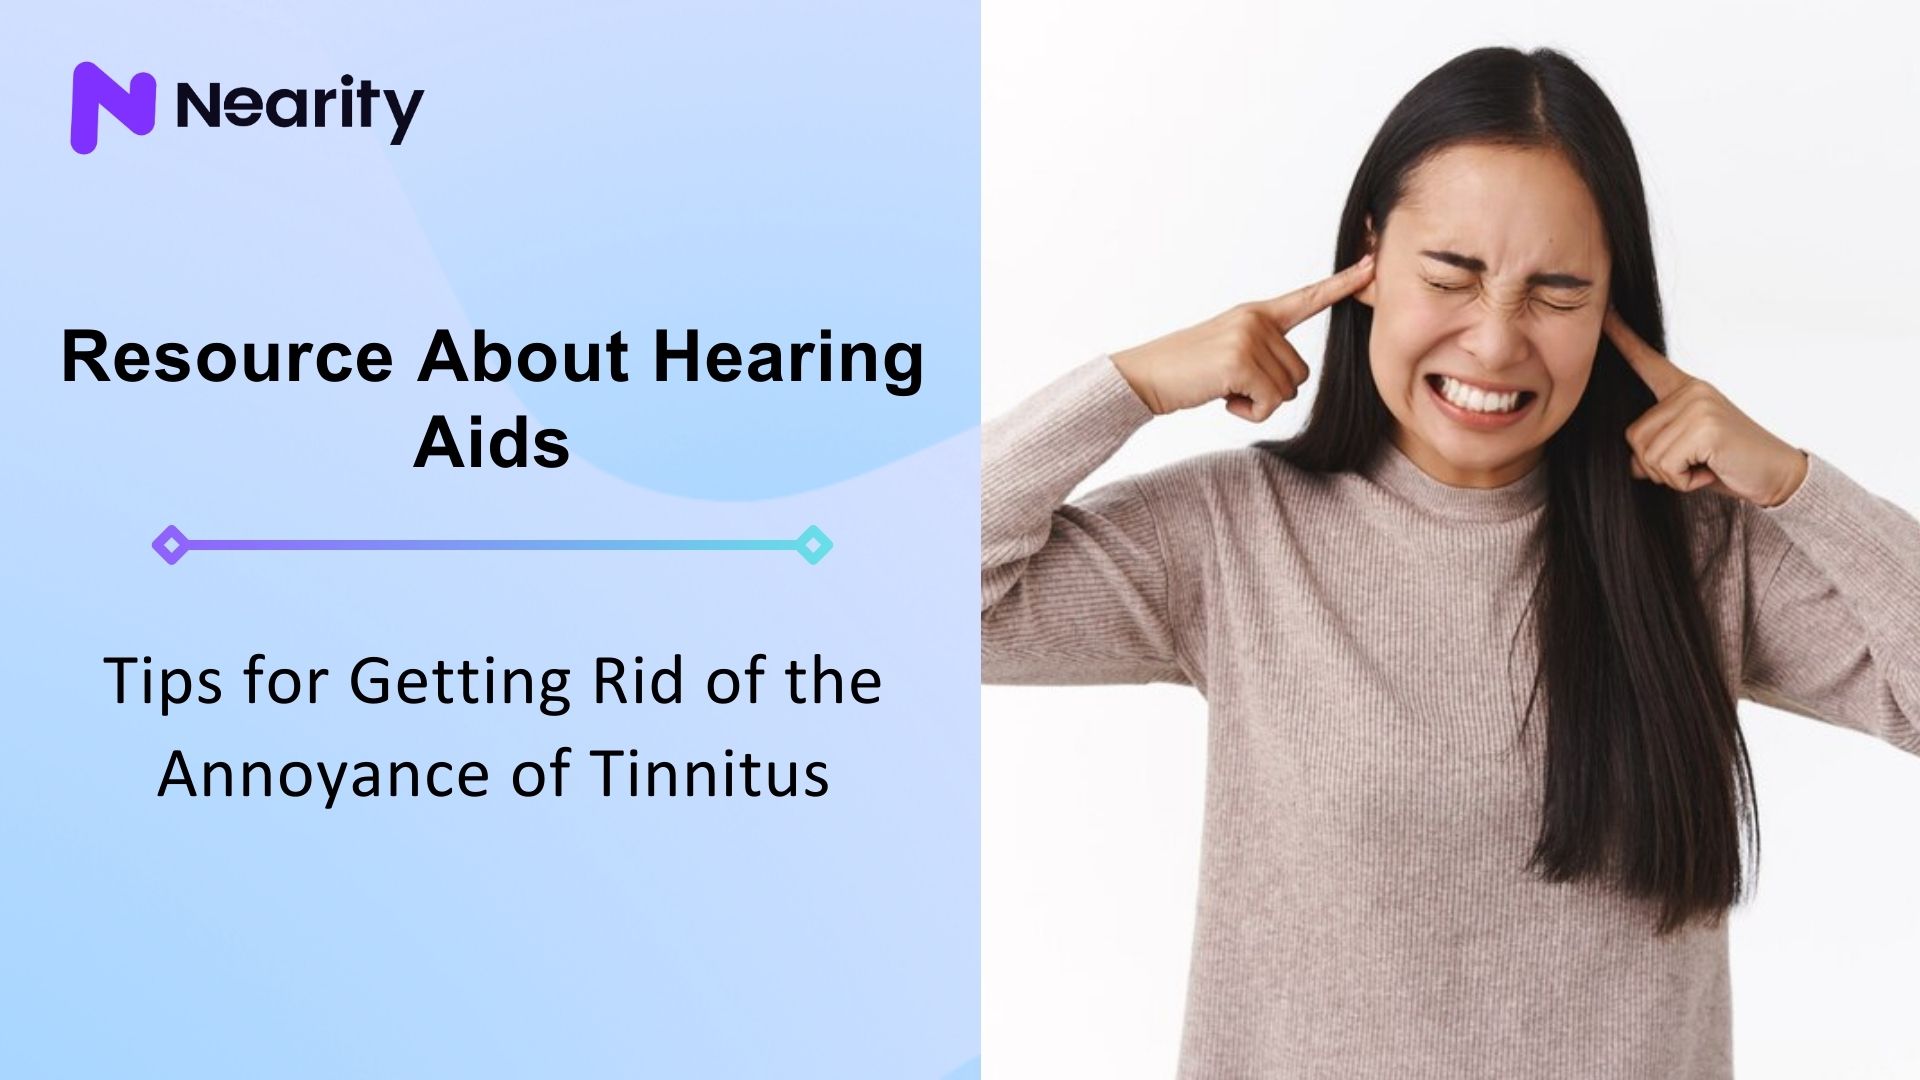 Tips for Getting Rid of the Annoyance of Tinnitus